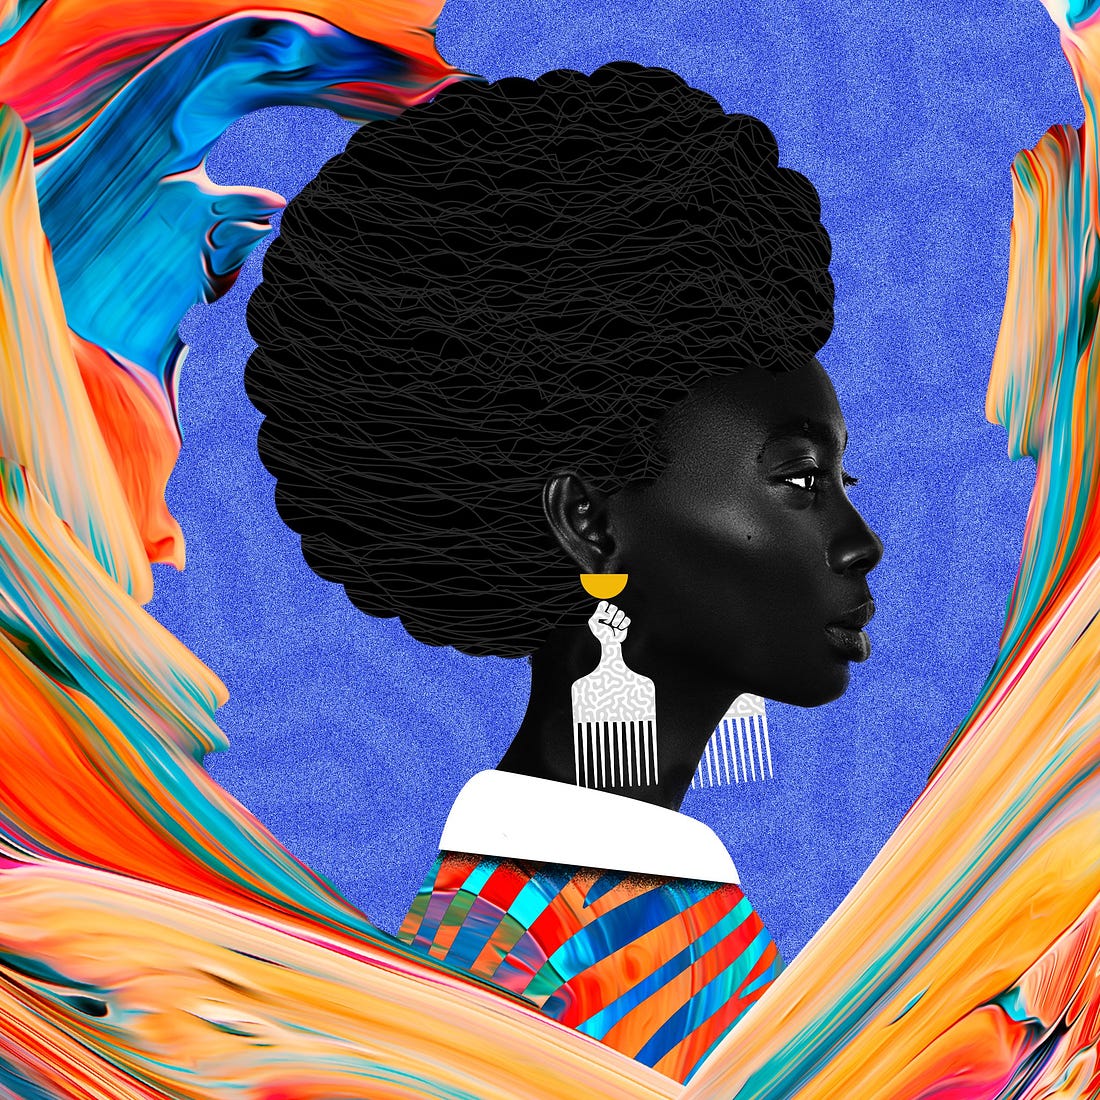 Photo of Black woman with afro and unity fist pick comb earrings against colorful background.